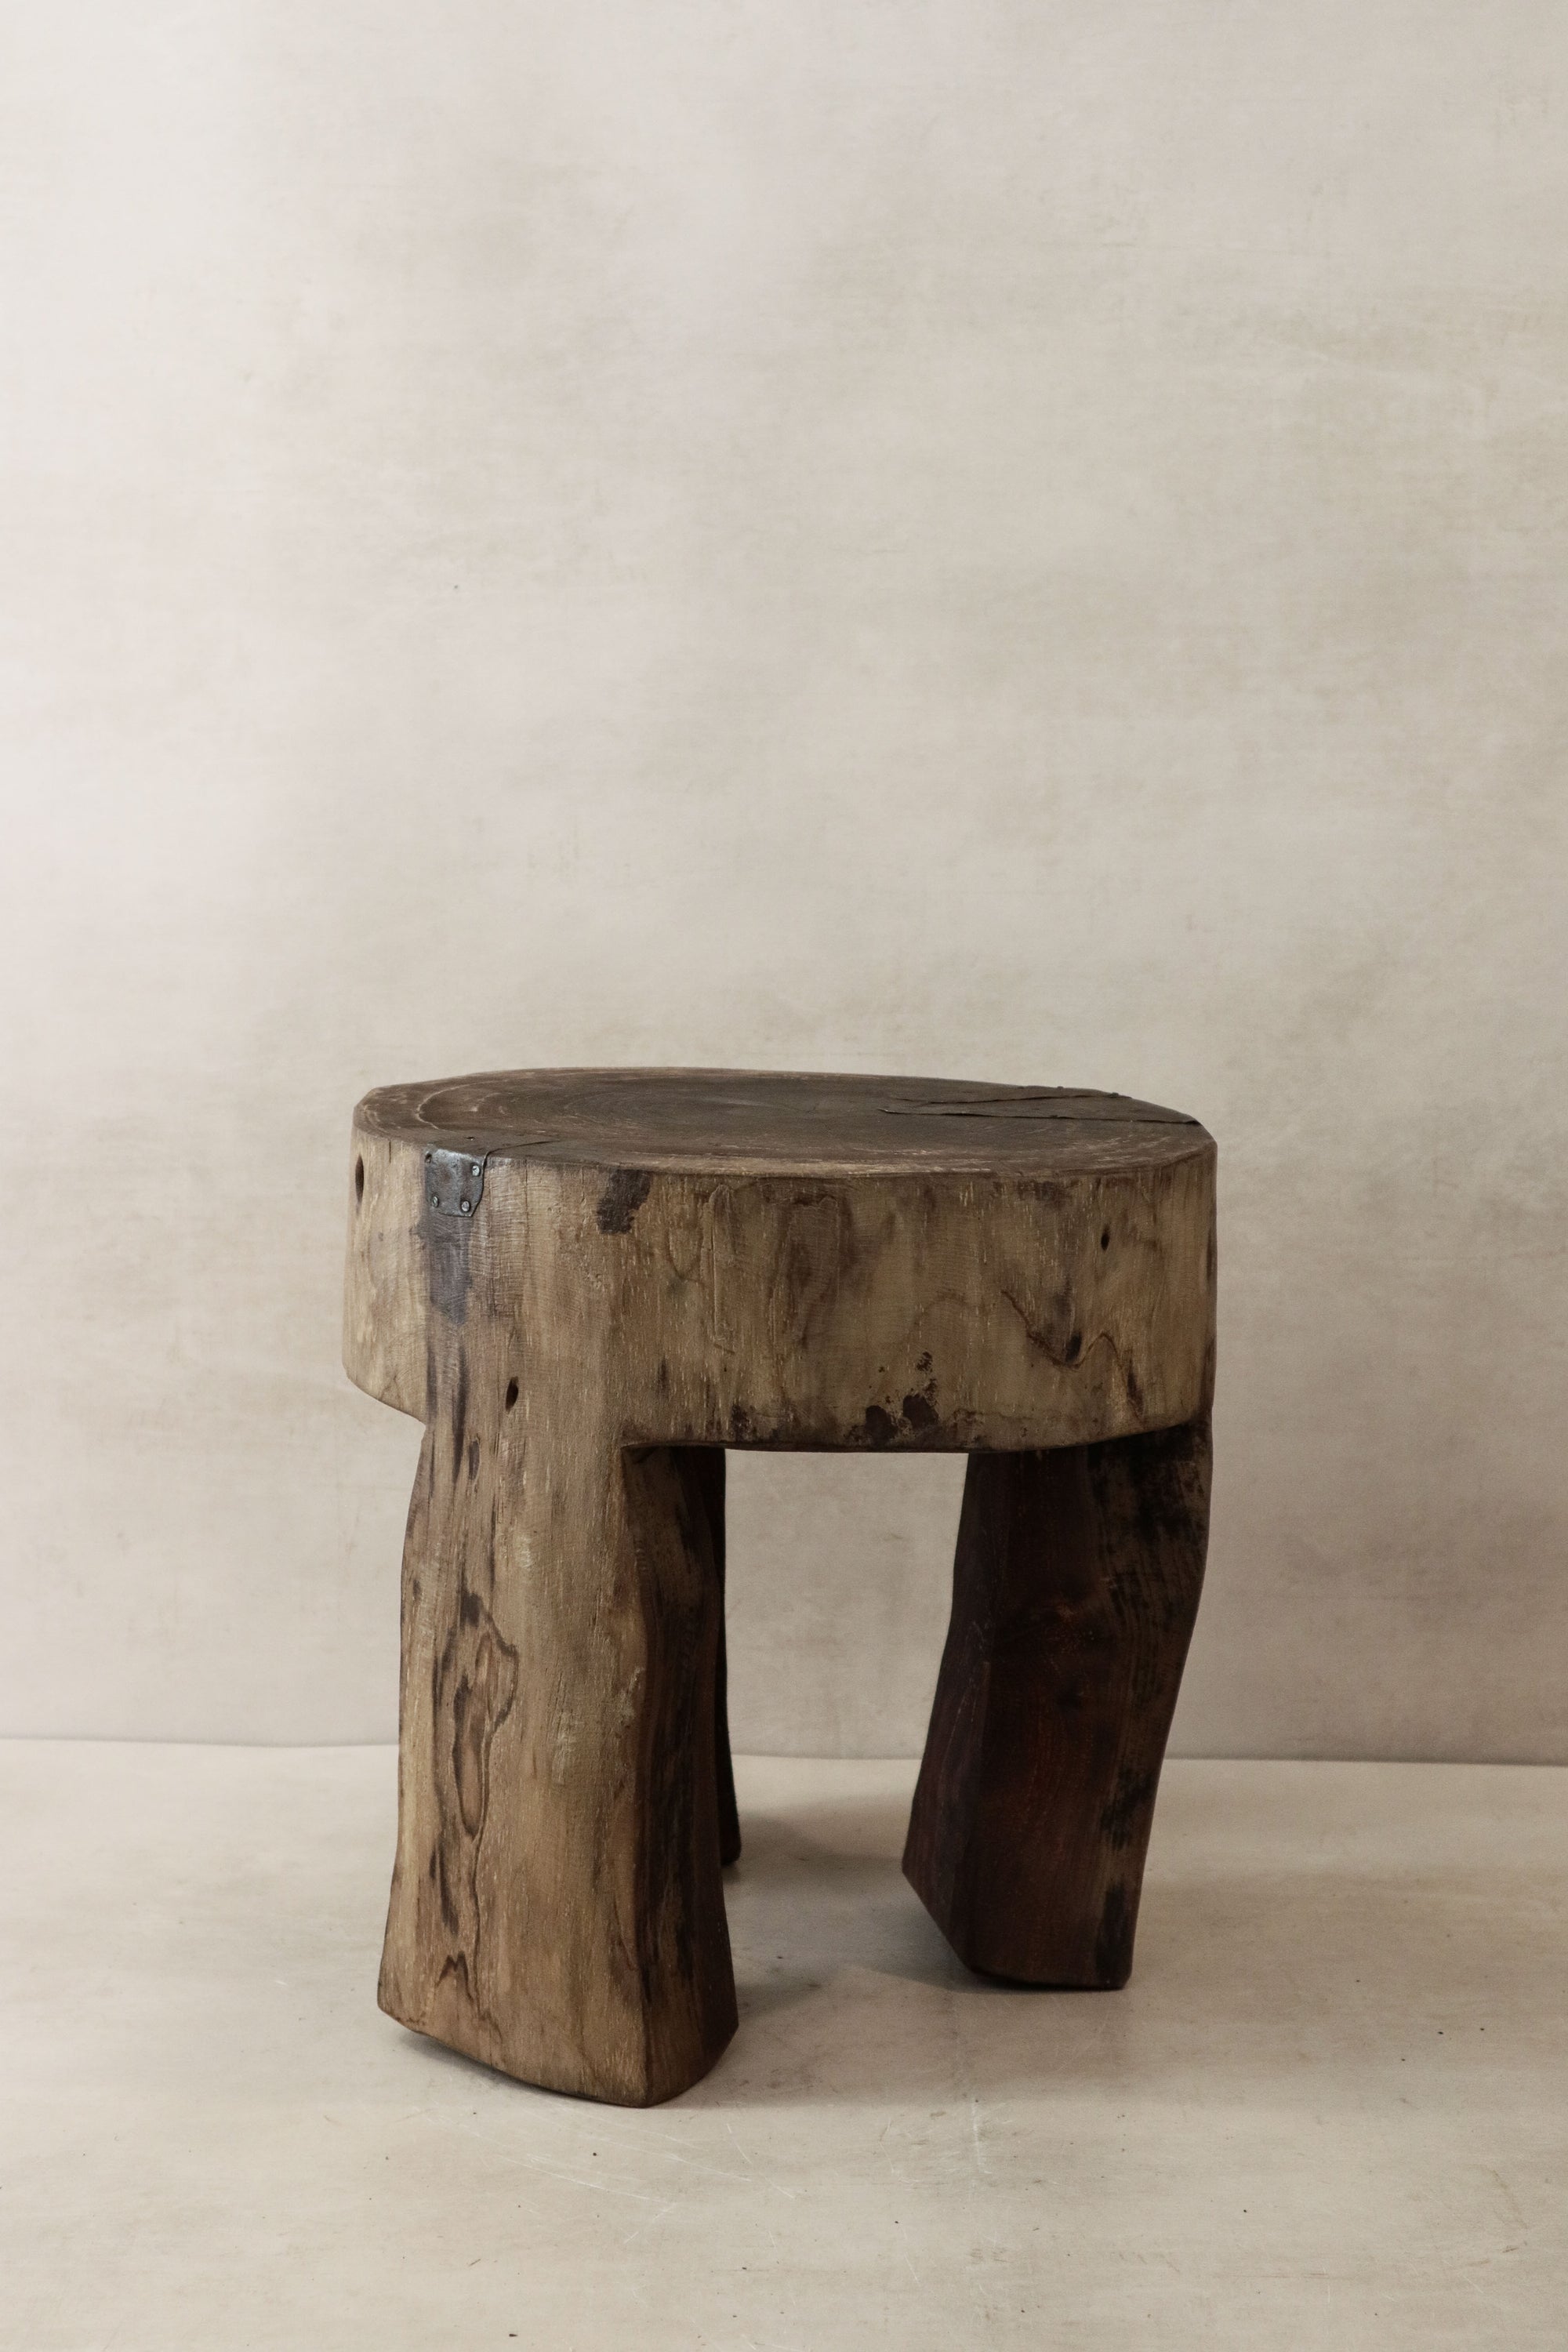 Hand Carved Wooden Stool\Side Table - 47.2